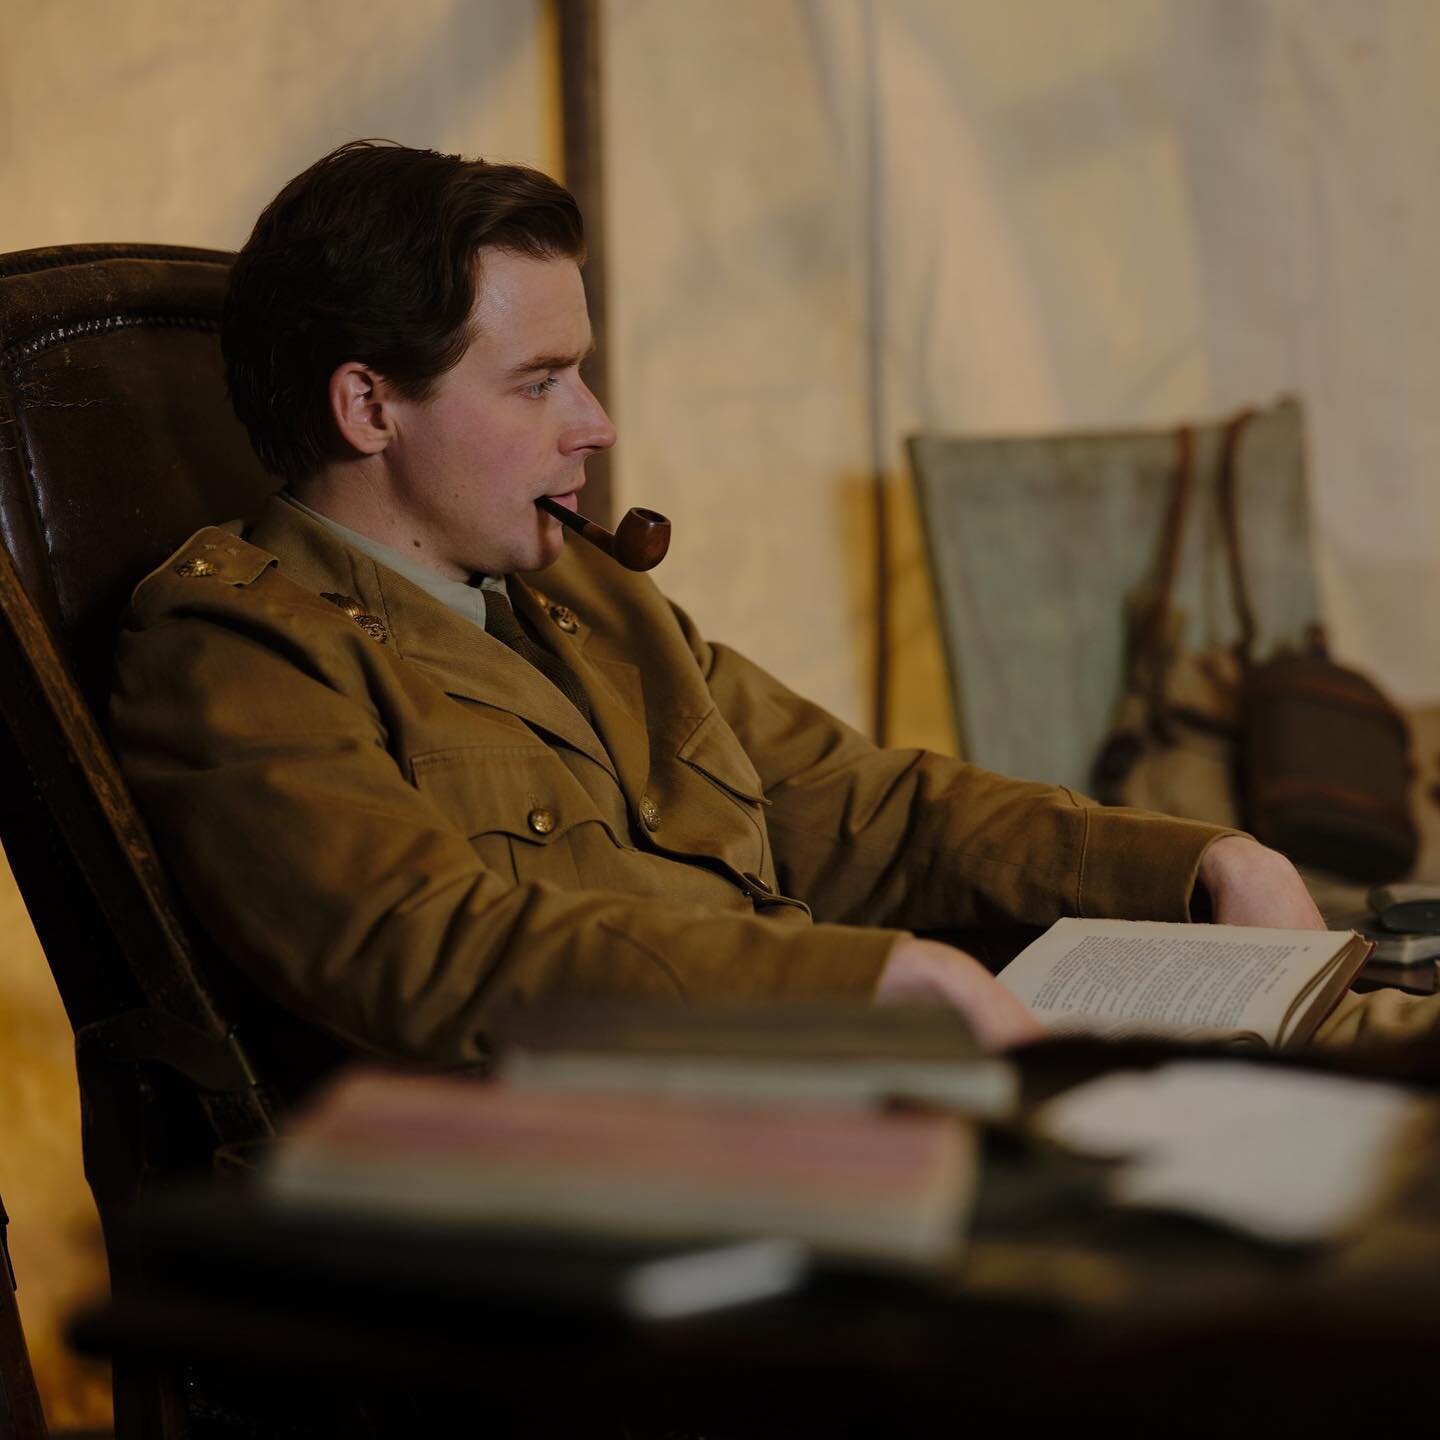 In his latest work, Benediction, Terence Davies once again looks to the past in an attempt to create meaning in our present with his latest biopic of World War I poet Siegfried Sassoon. Find the full review of Benediction at the link in our bio! #fil